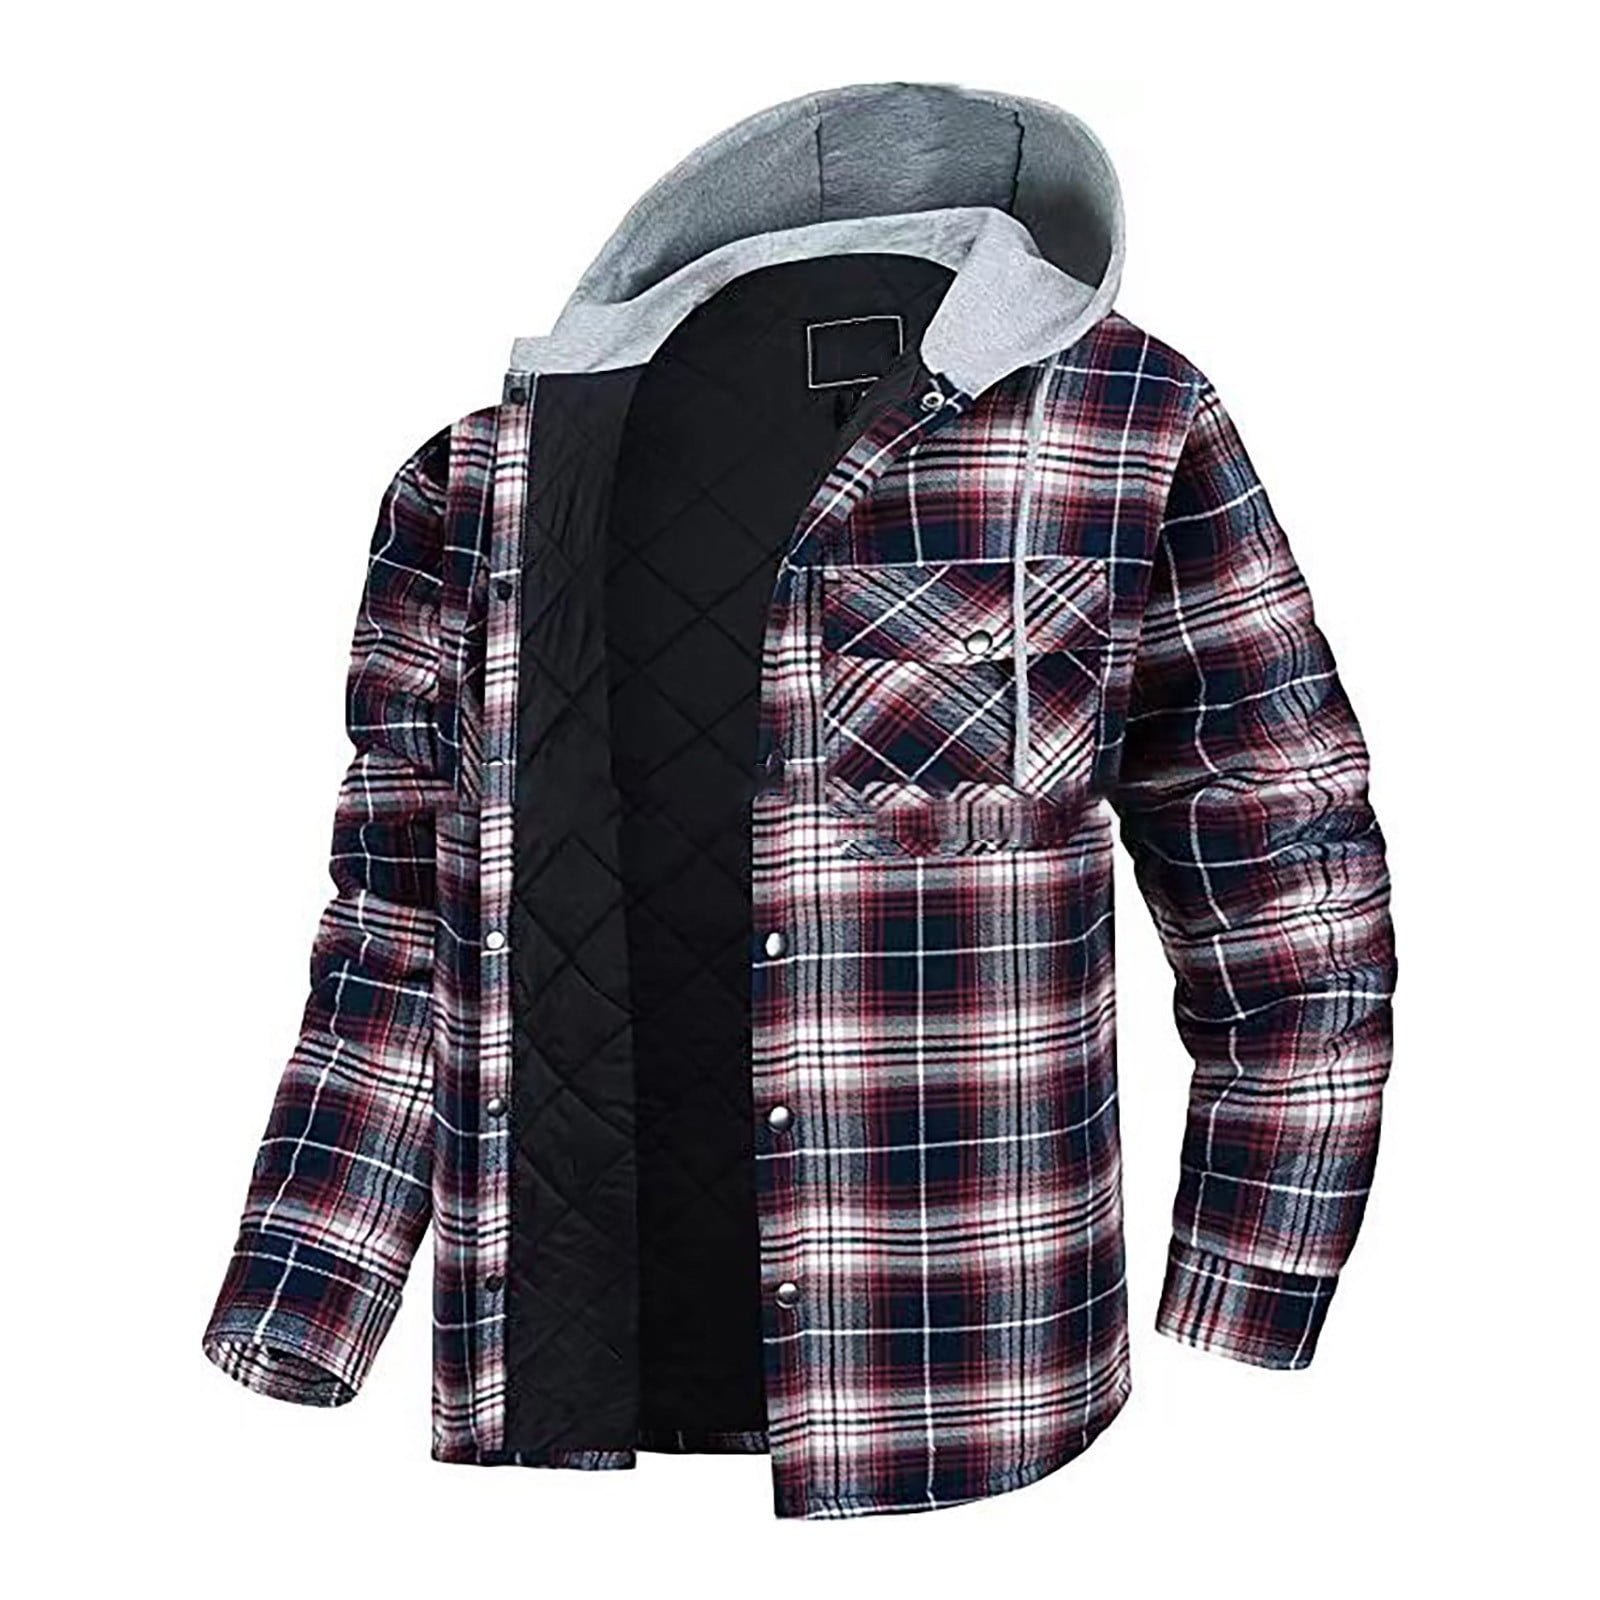 Hvyesh Plaid Flannel Shirt Jackets for Men Big and Tall Quilted Lined ...